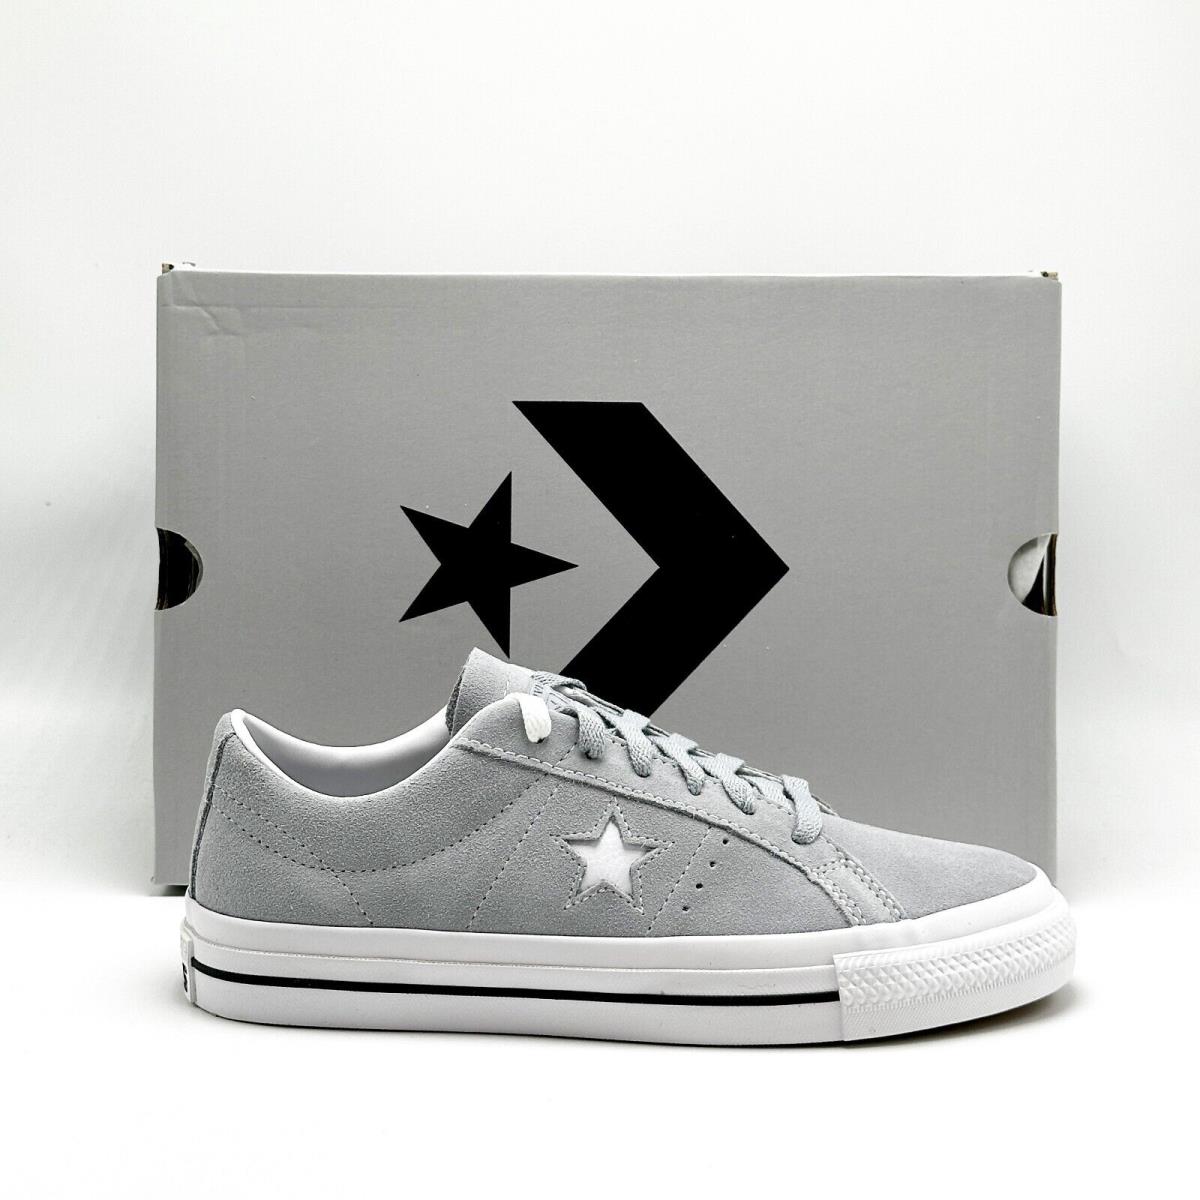 Unisex Converse One Star Pro Skateboard Shoes Wolf Gray A04600C